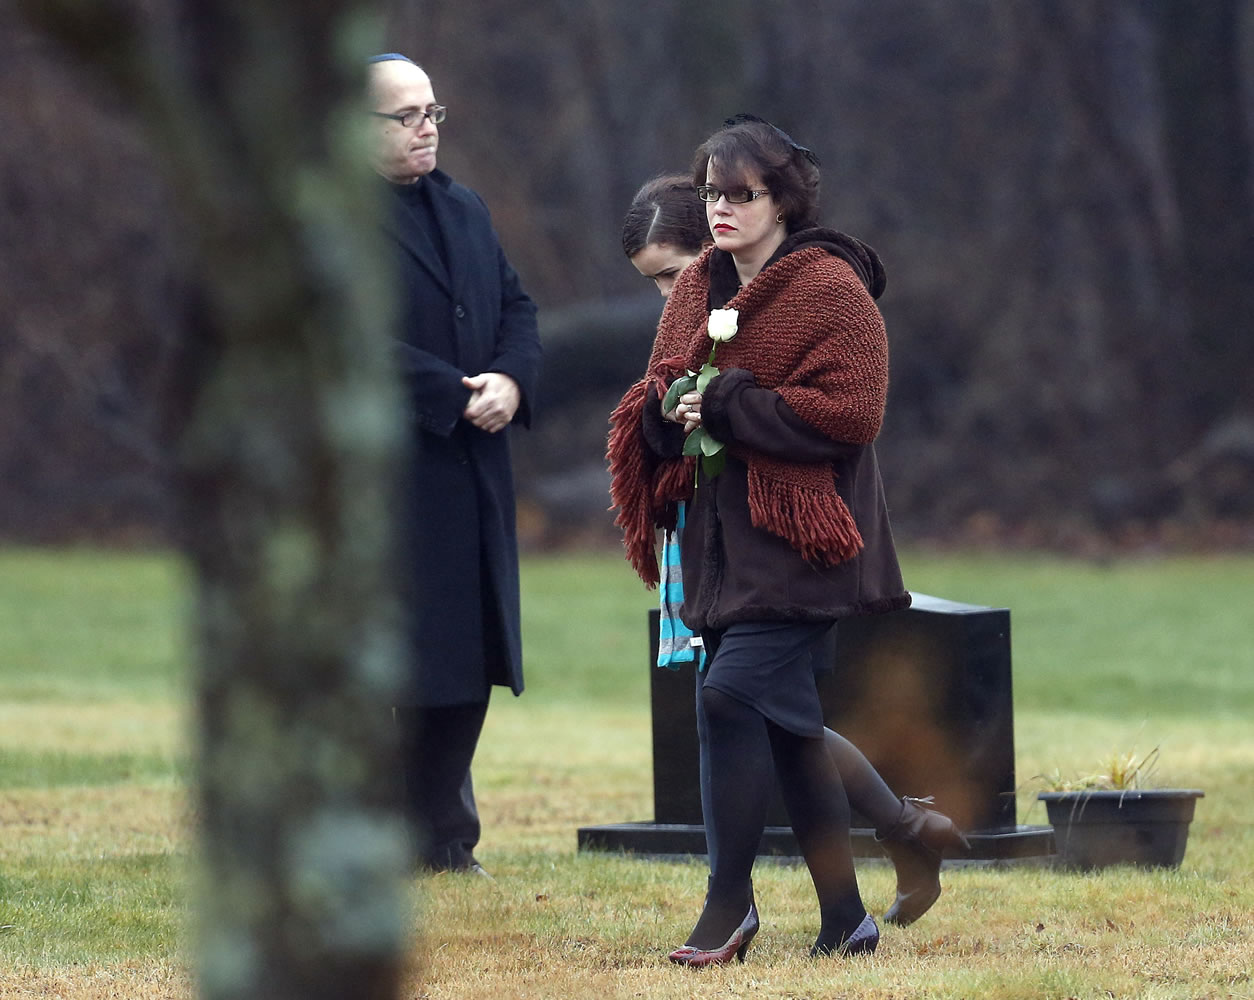 Veronique Pozner arrives at B'nai Israel Cemetery on Monday for burial services for her 6-year-old son, Noah Pozner.